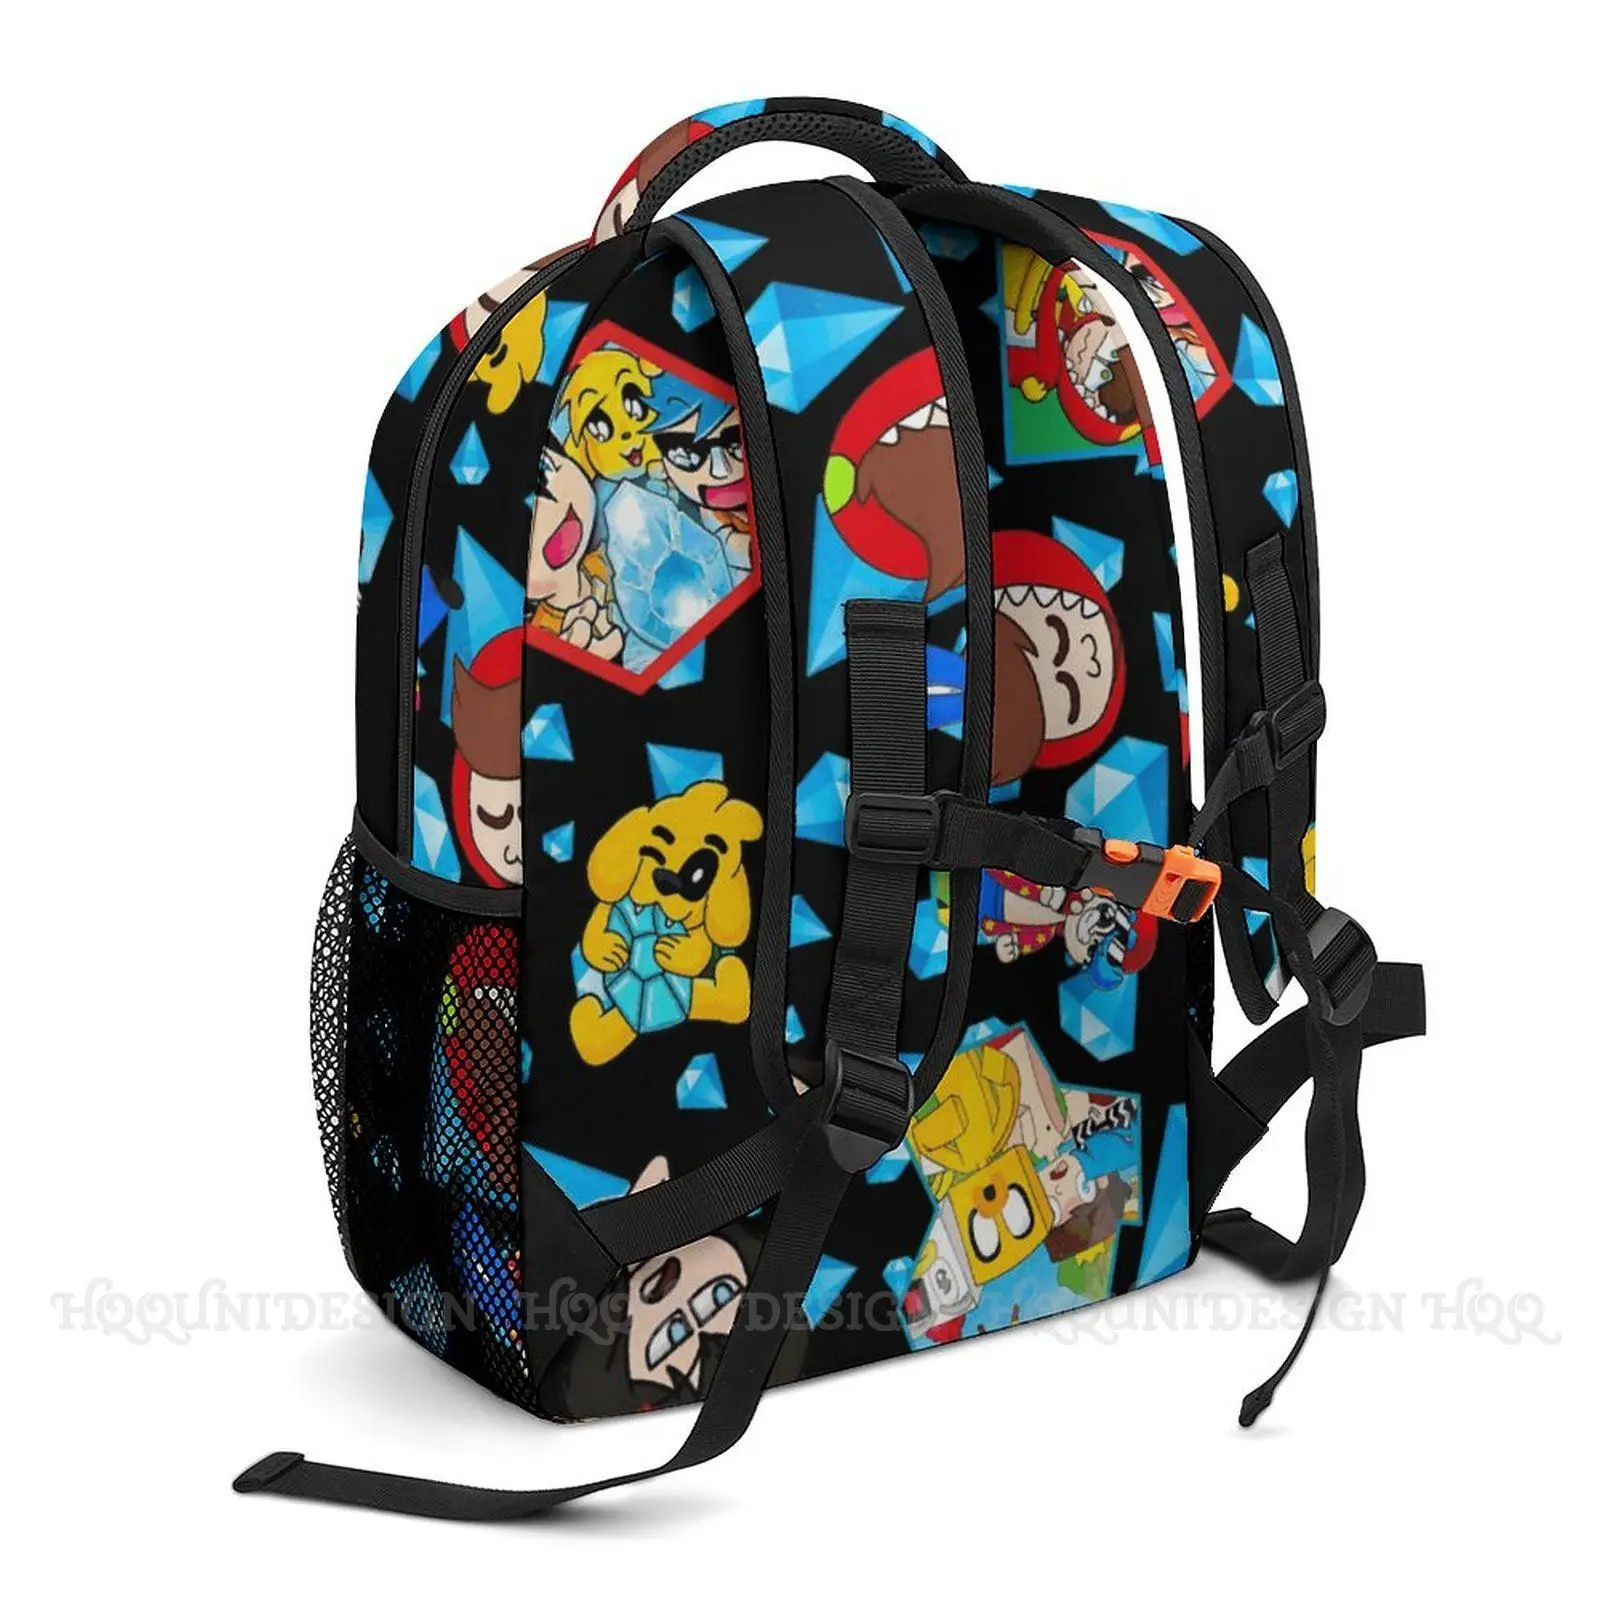 Compadretes Mikecrack Minecra Games for Teenage School Bag Toddlers Bag The Mikecrack Diamantito Travel Rucksack Backpack| - AliExpress